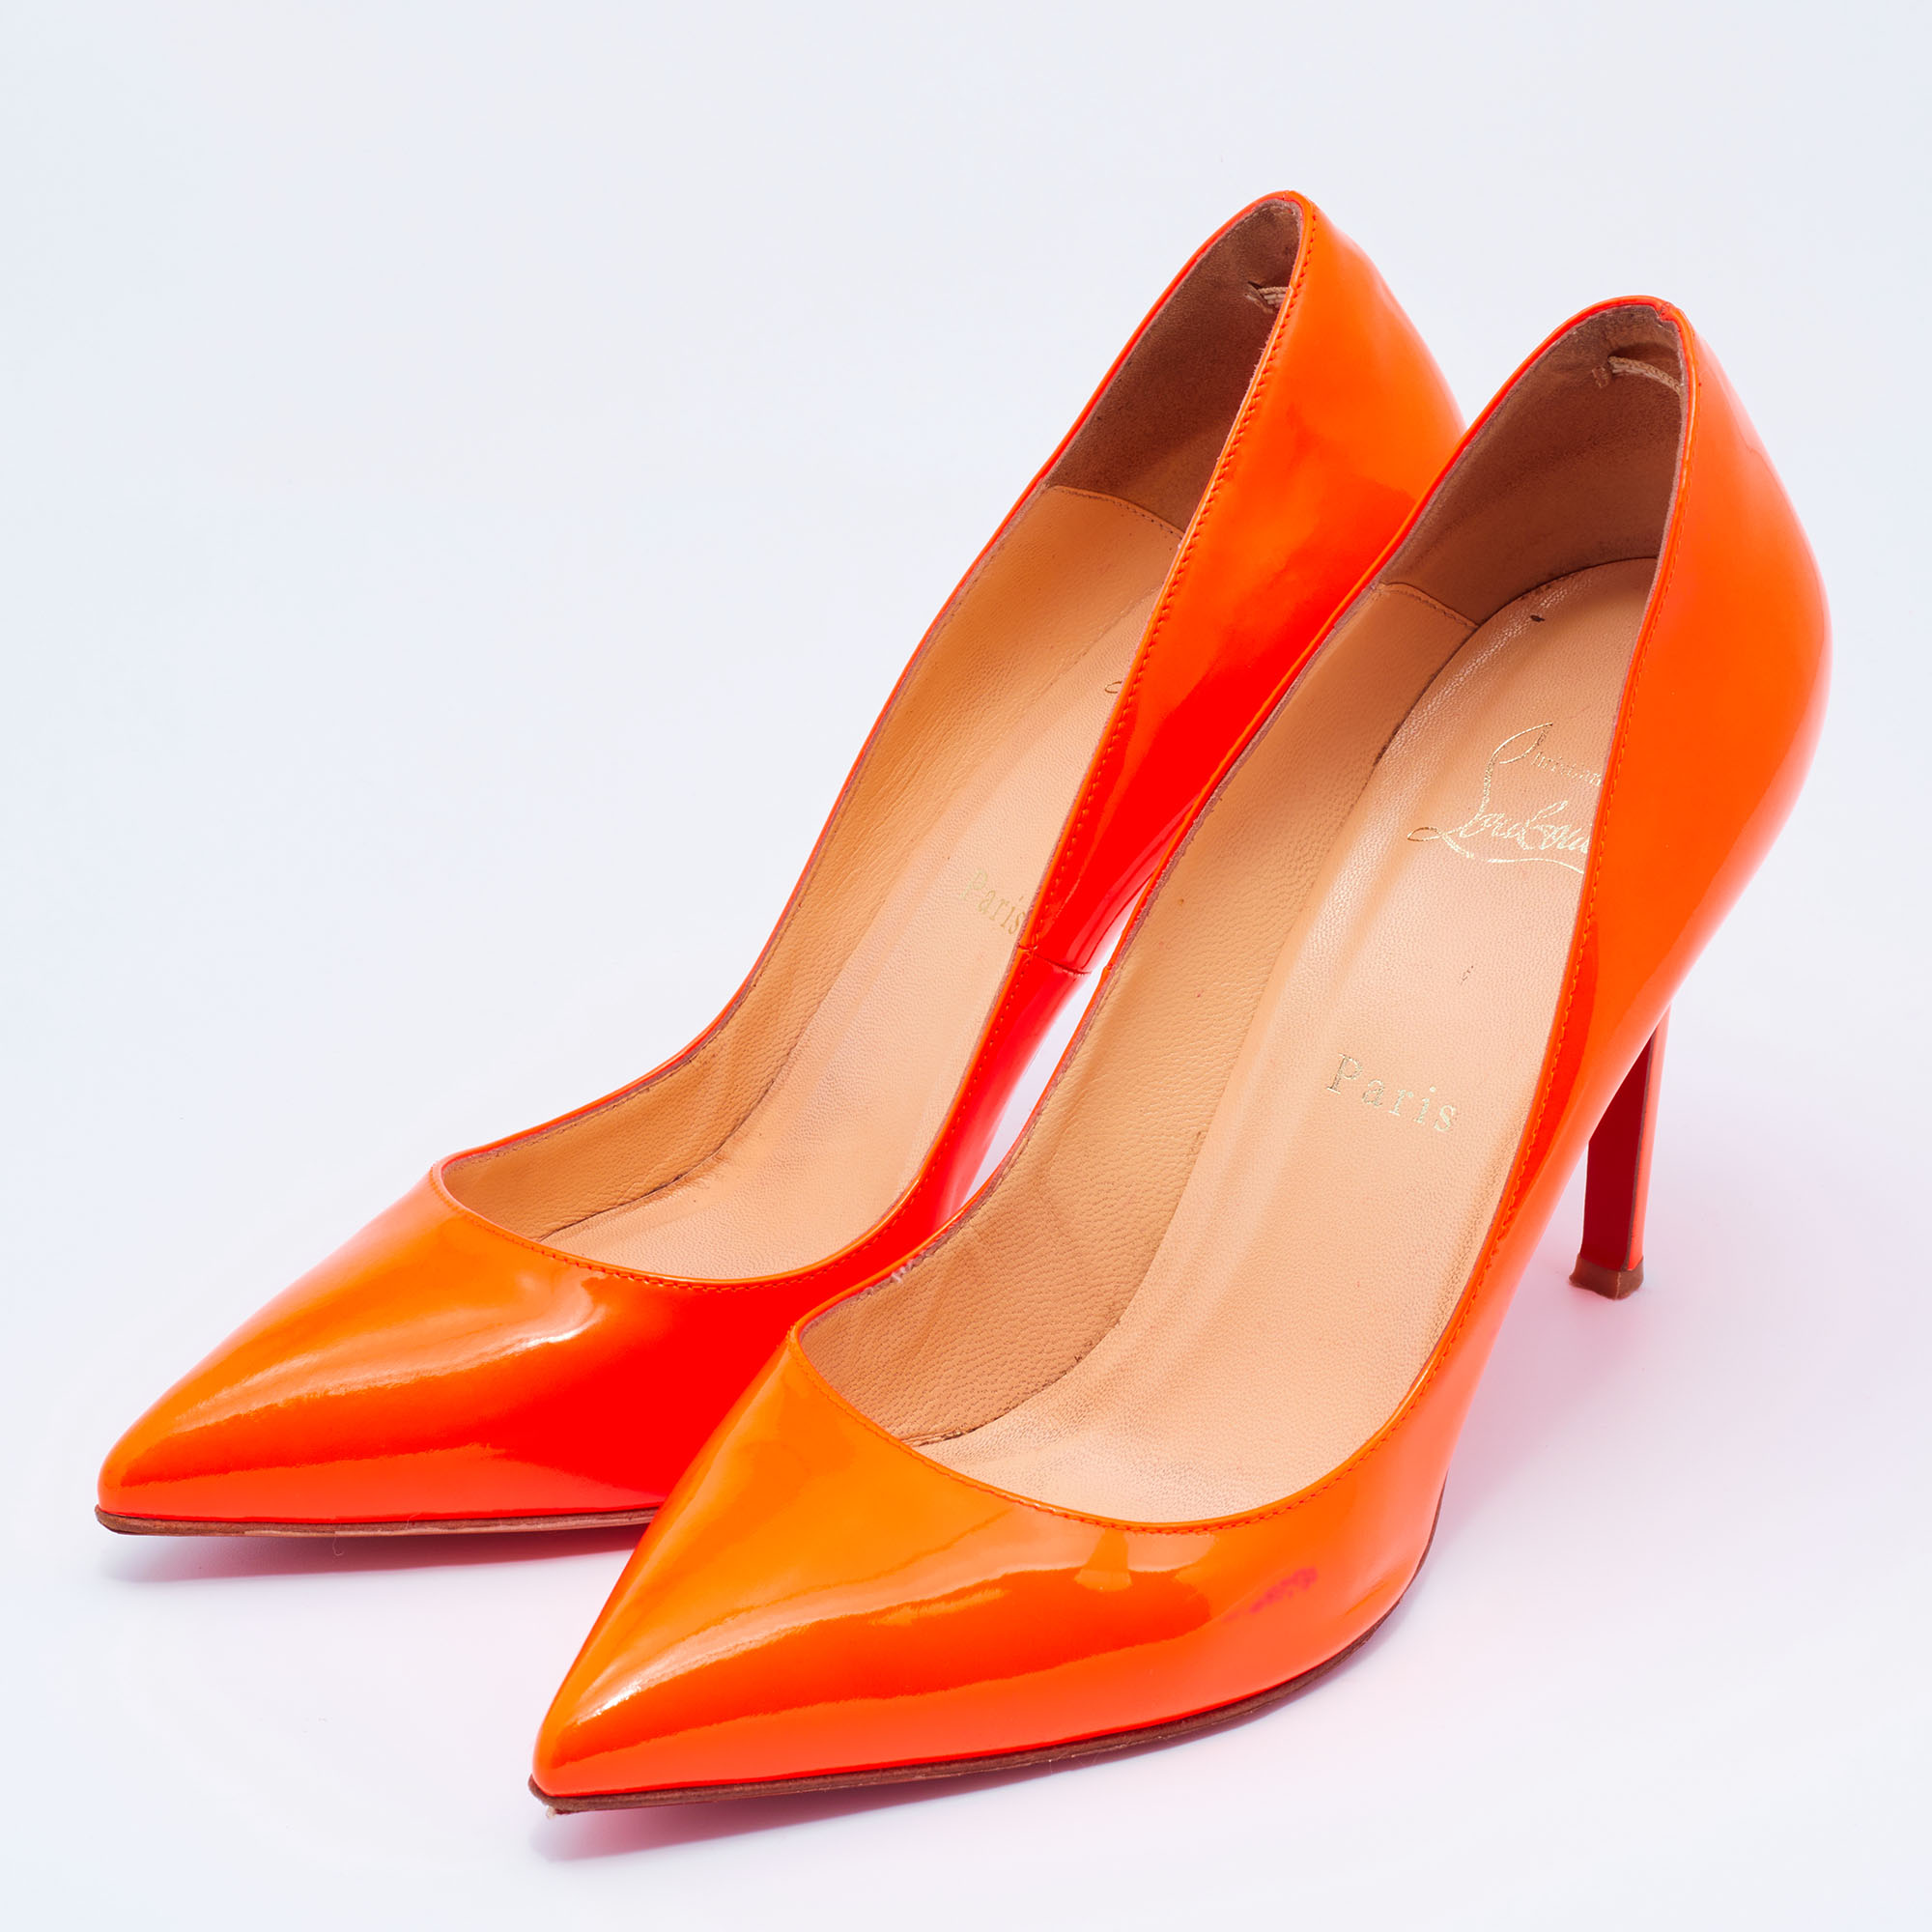 

Christian Louboutin Neon Orange Patent Leather Pigalle Pointed Toe Pumps Size